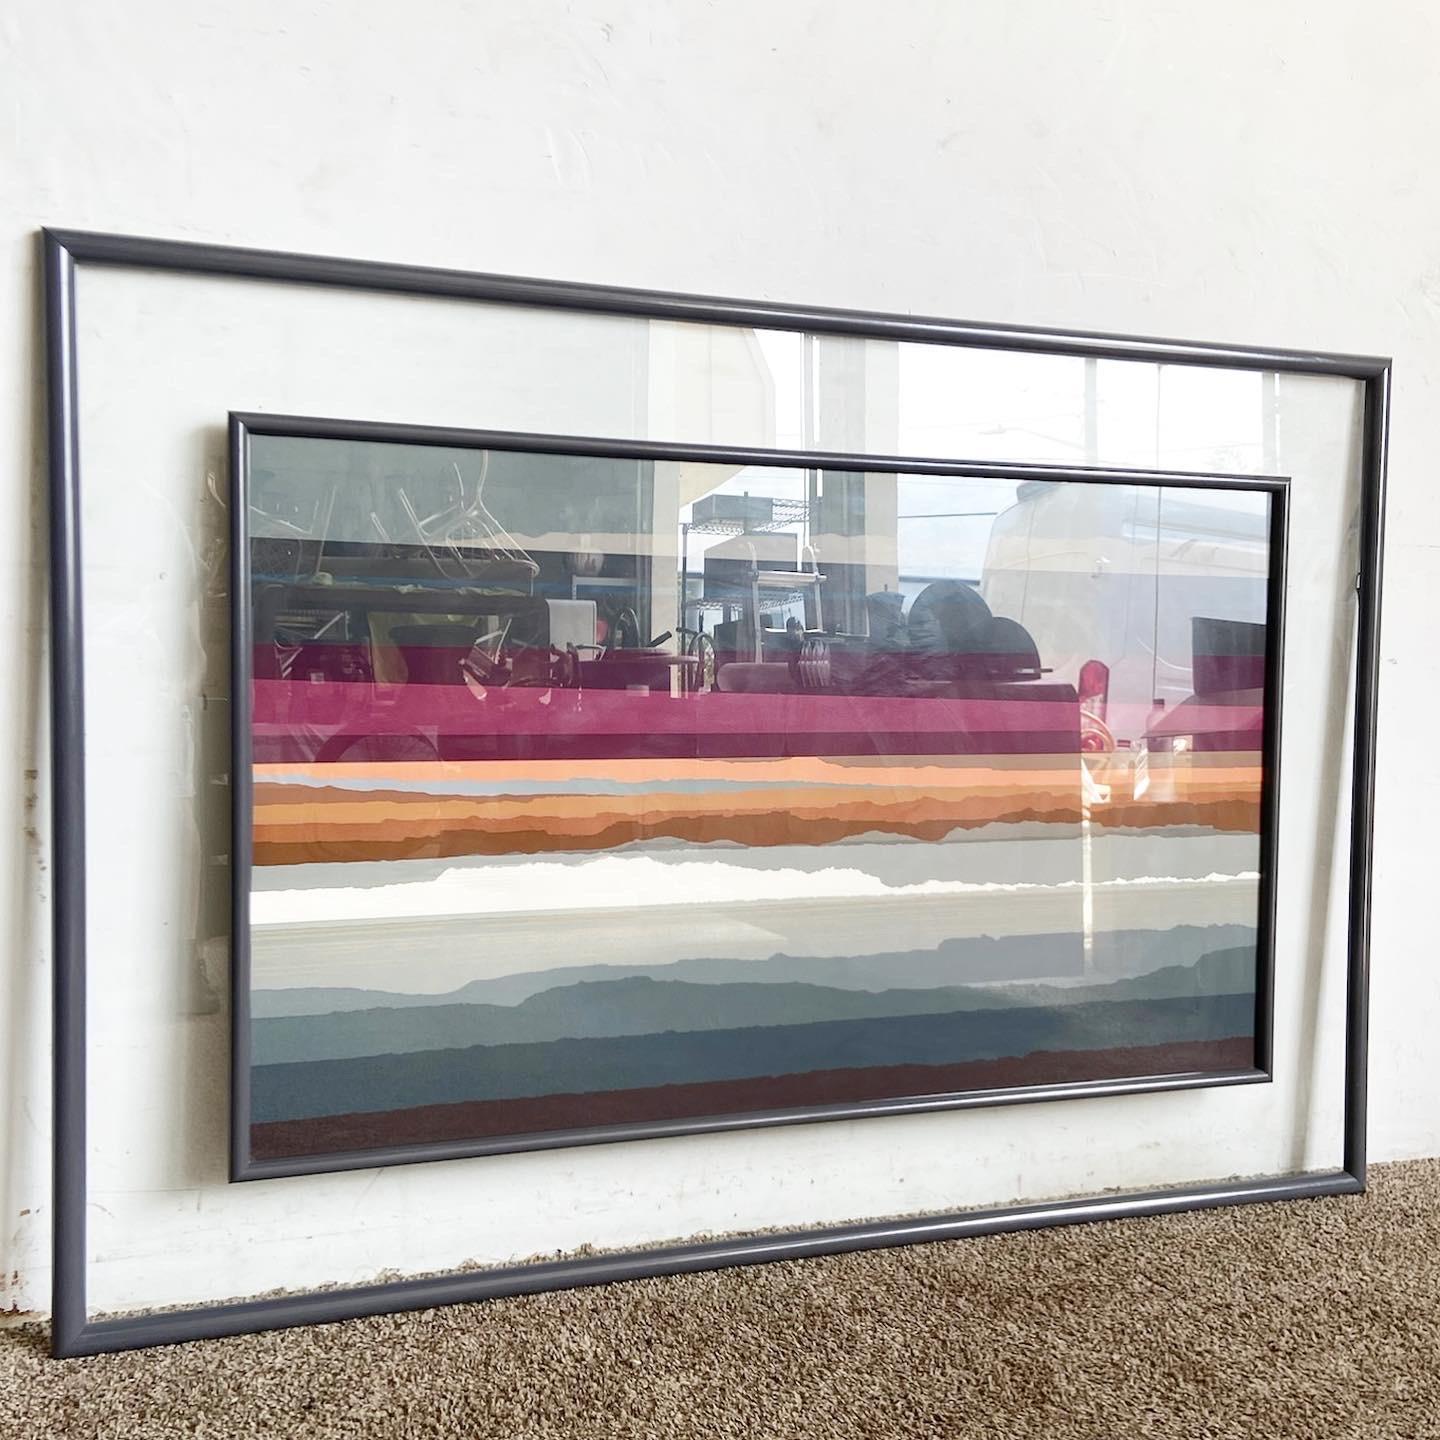 Immerse yourself in the artistry of this Signed Abstract Landscape Lithograph. Numbered 84/285, this limited-edition piece captivates with its vivid mountain-scape and colorful sunset, framed in modern acrylic.
Wooden exterior of frame has a crack